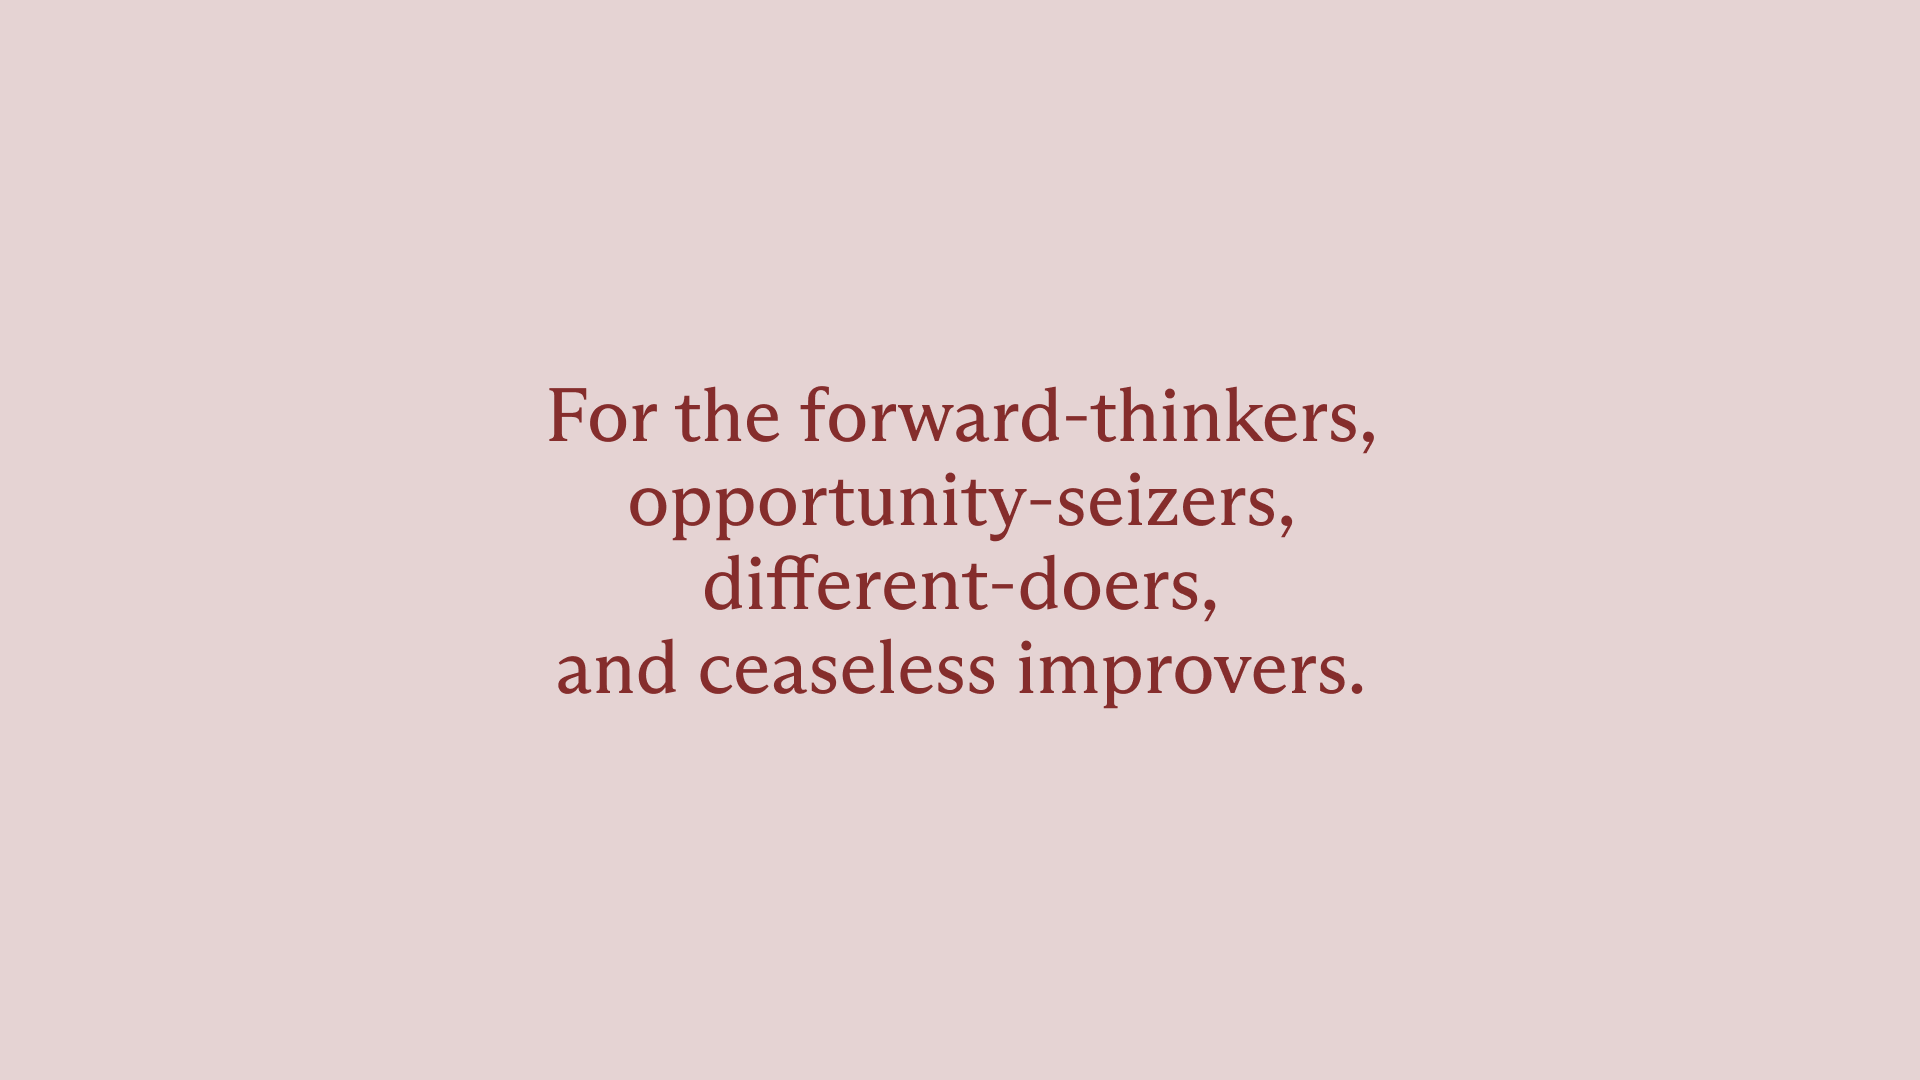 Dark red text on top of a dusty pink background. The text says, “For the forward-thinkers, opportunity-seizers, different-doers, and ceaseless improvers.”